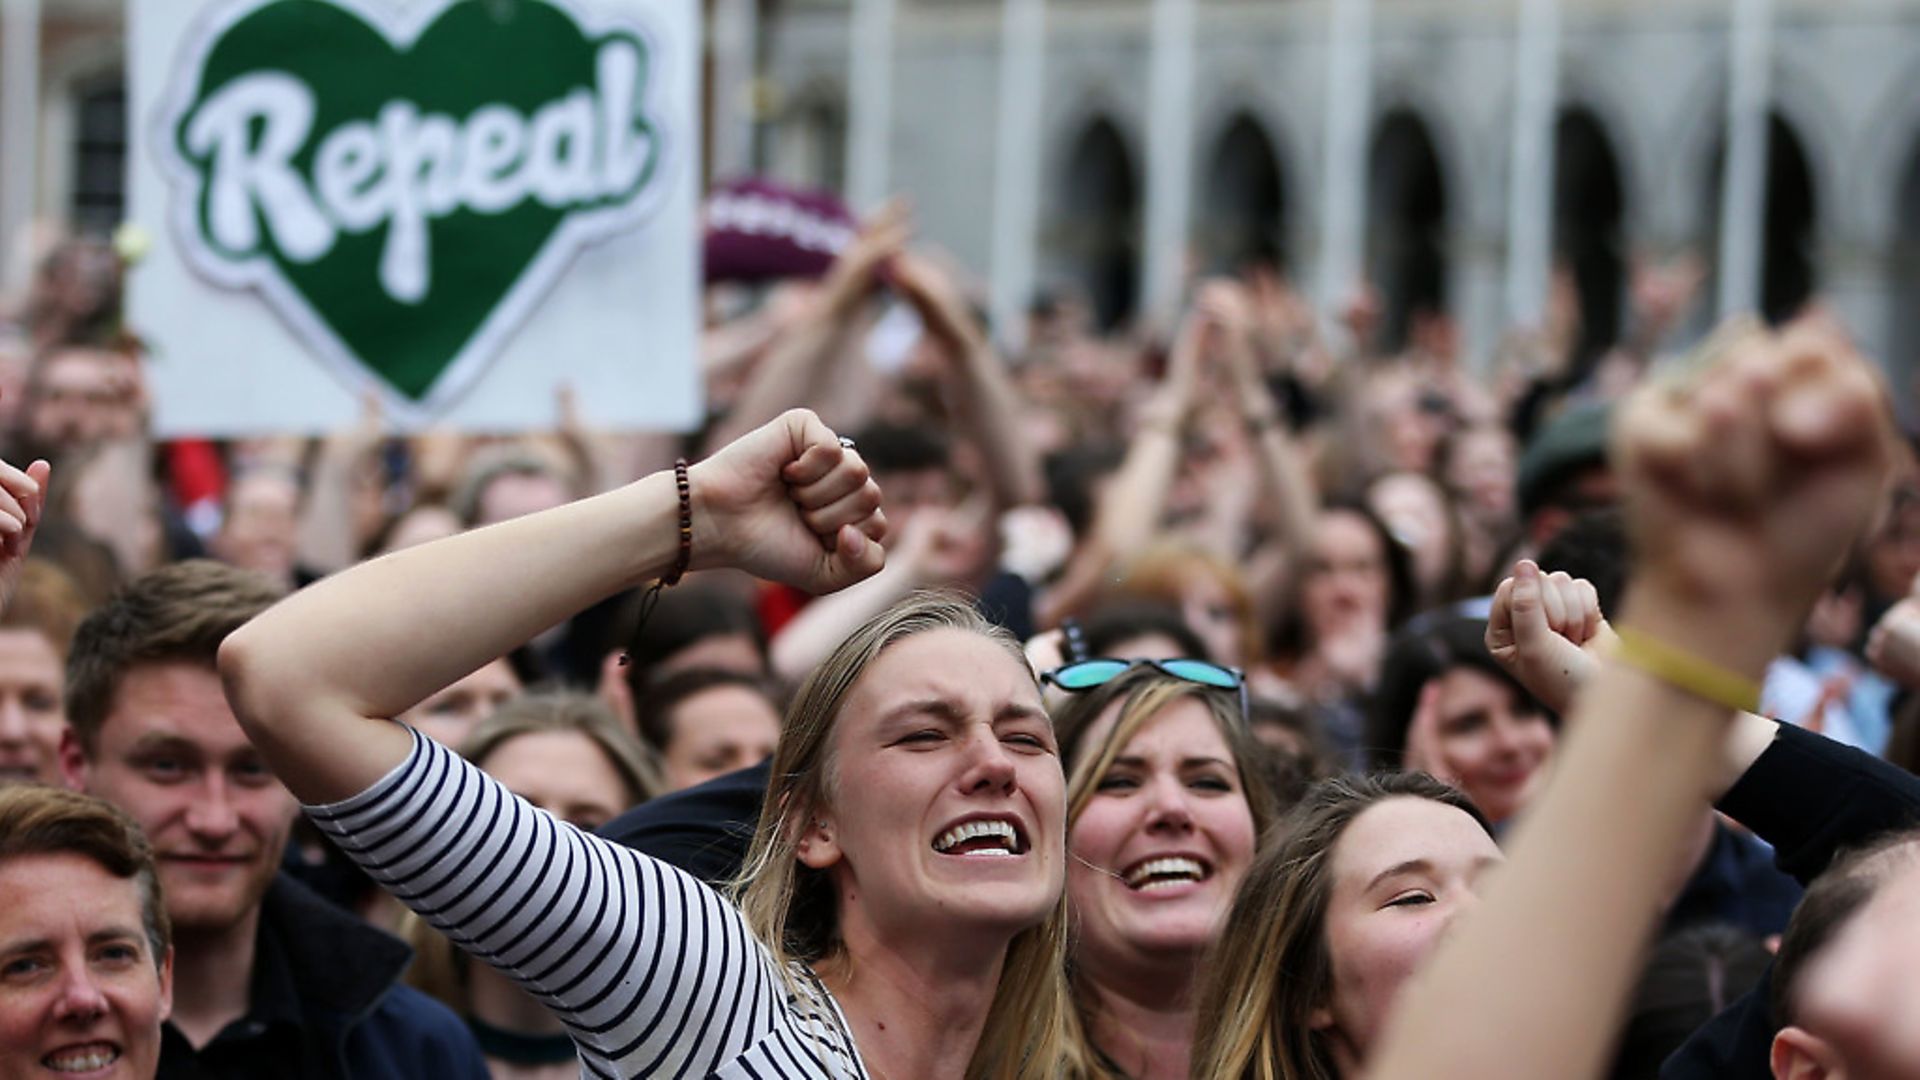 People celebrate at Dublin Castle as the official results of the referendum on the 8th Amendment of the Irish Constitution are announced in favour of the yes vote. Picture date: Saturday May 26, 2018. Photo: Brian Lawless/PA Wire - Credit: PA Wire/PA Images